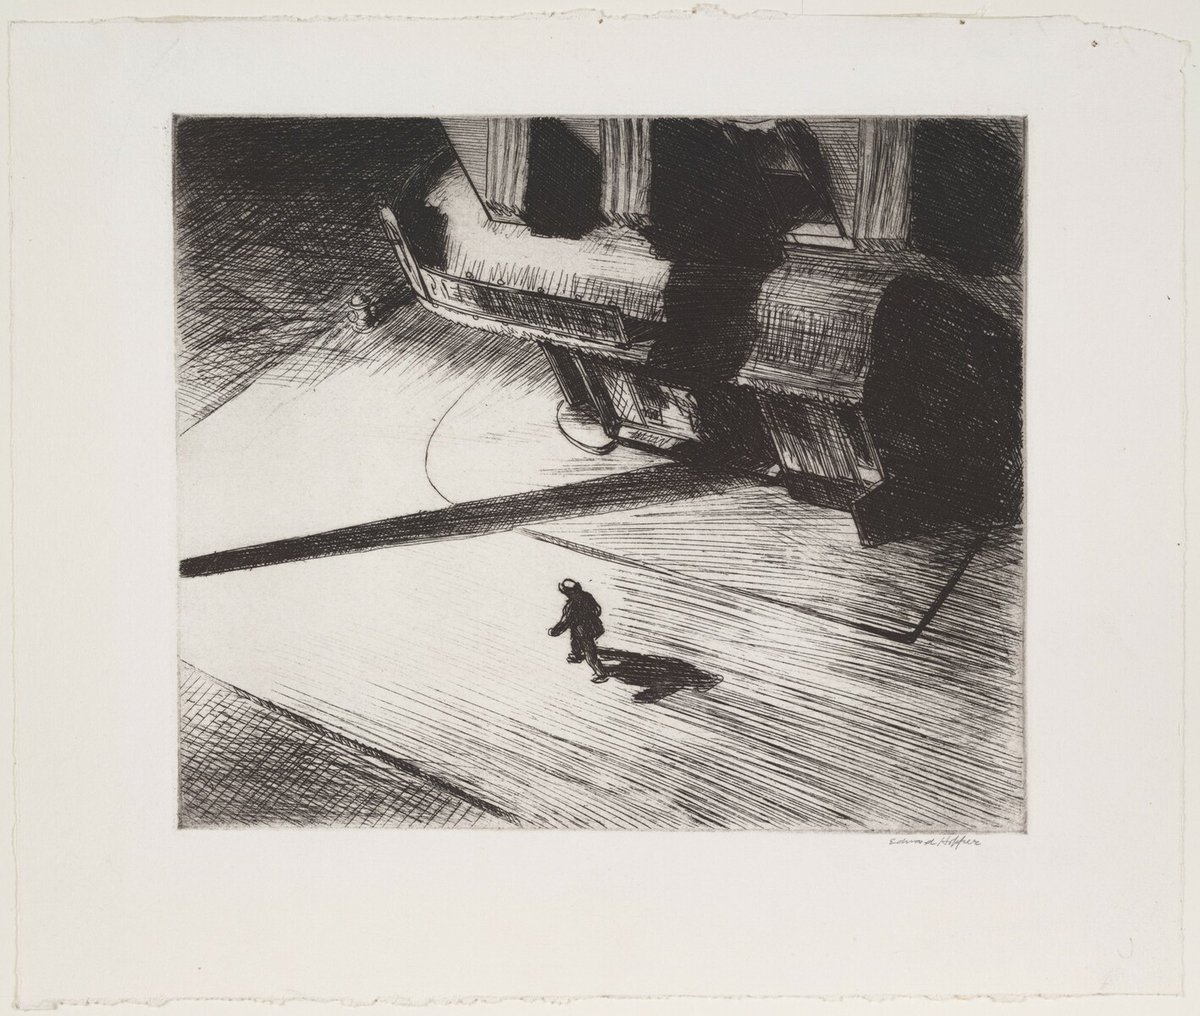 Edward Hopper, Night Shadows, 1921, published December 1924 #museumofmodernart #museumarchive moma.org/collection/wor…